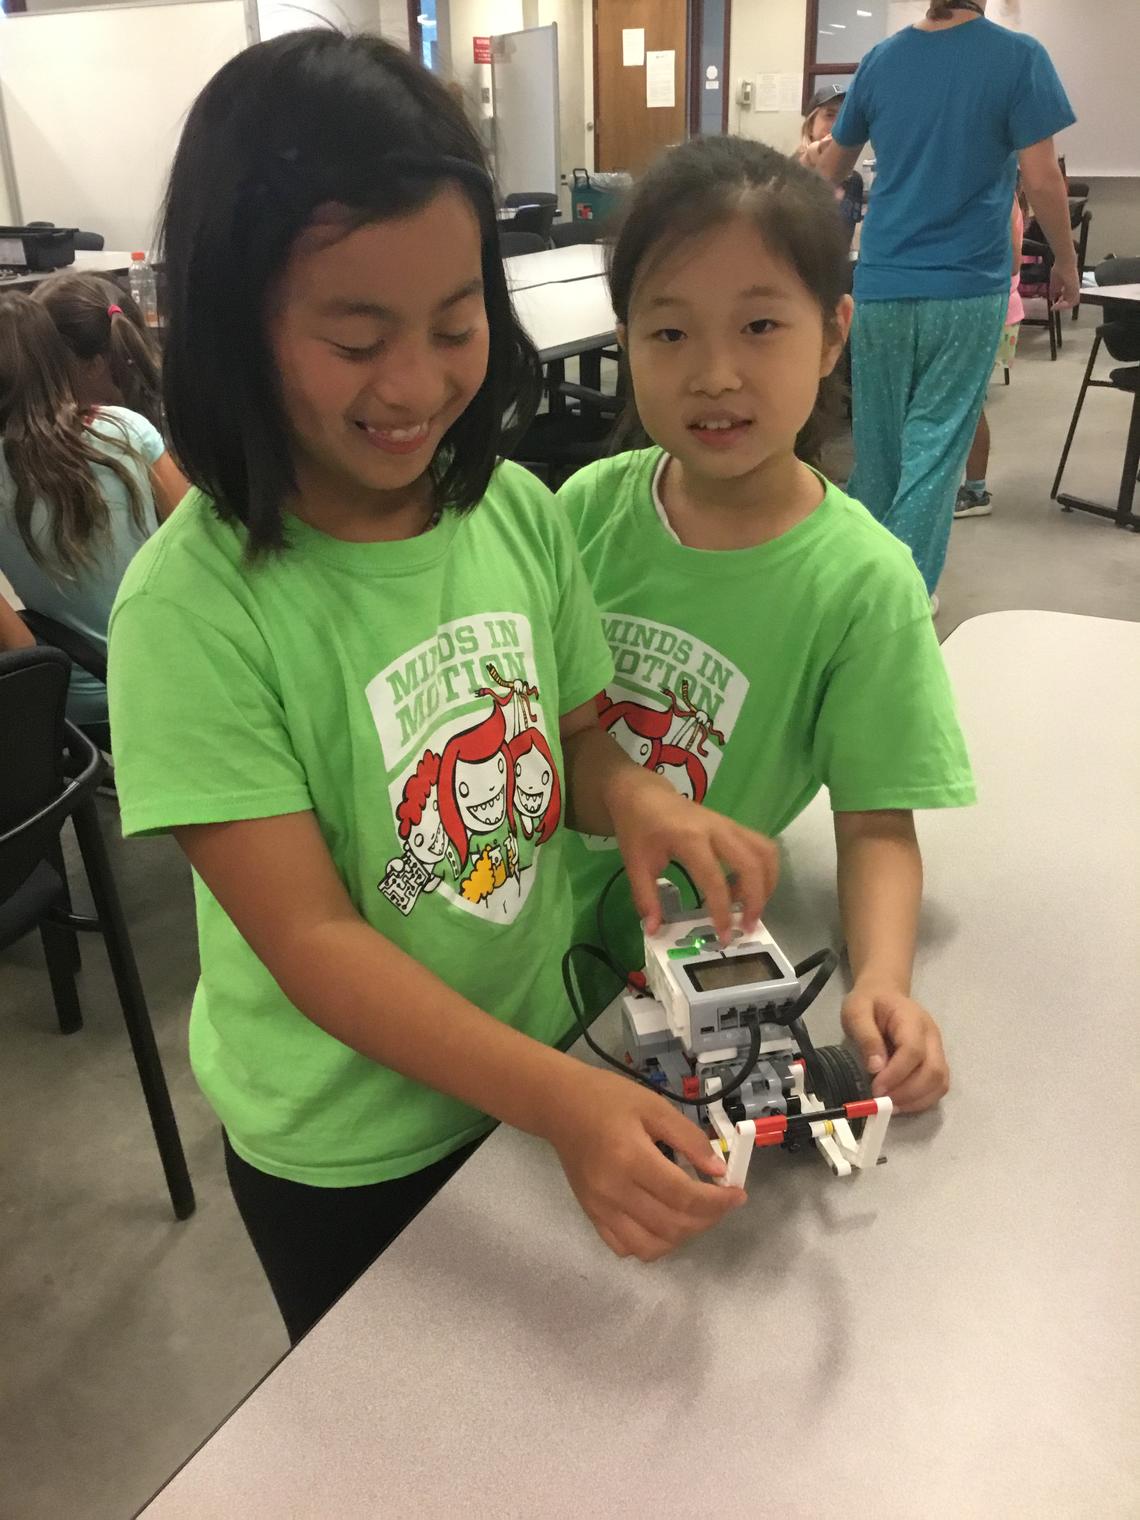 Two girls built Lego Mindstorms robots in a science and engineering camp.